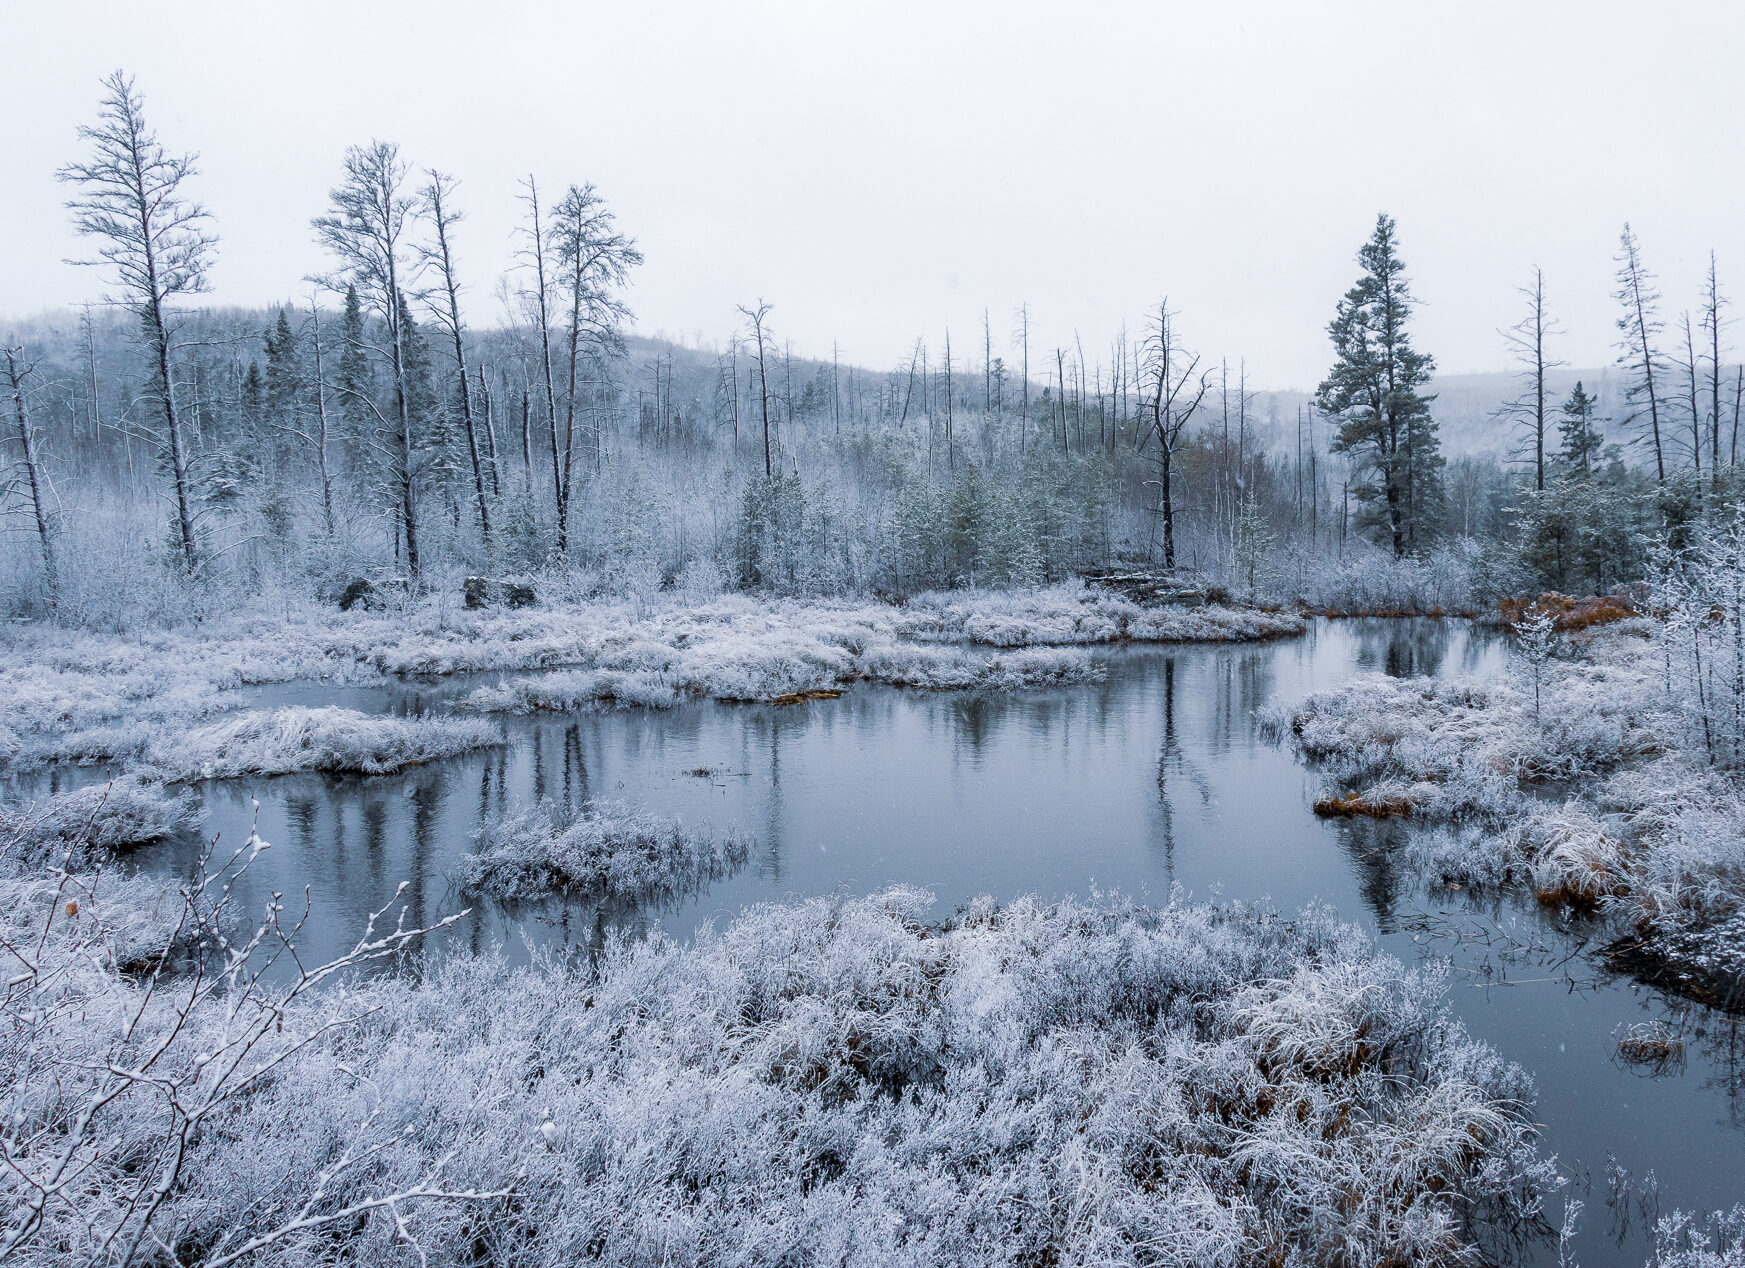 image of first frost and snow non the gunflint trail near Grand Marais Minnesota